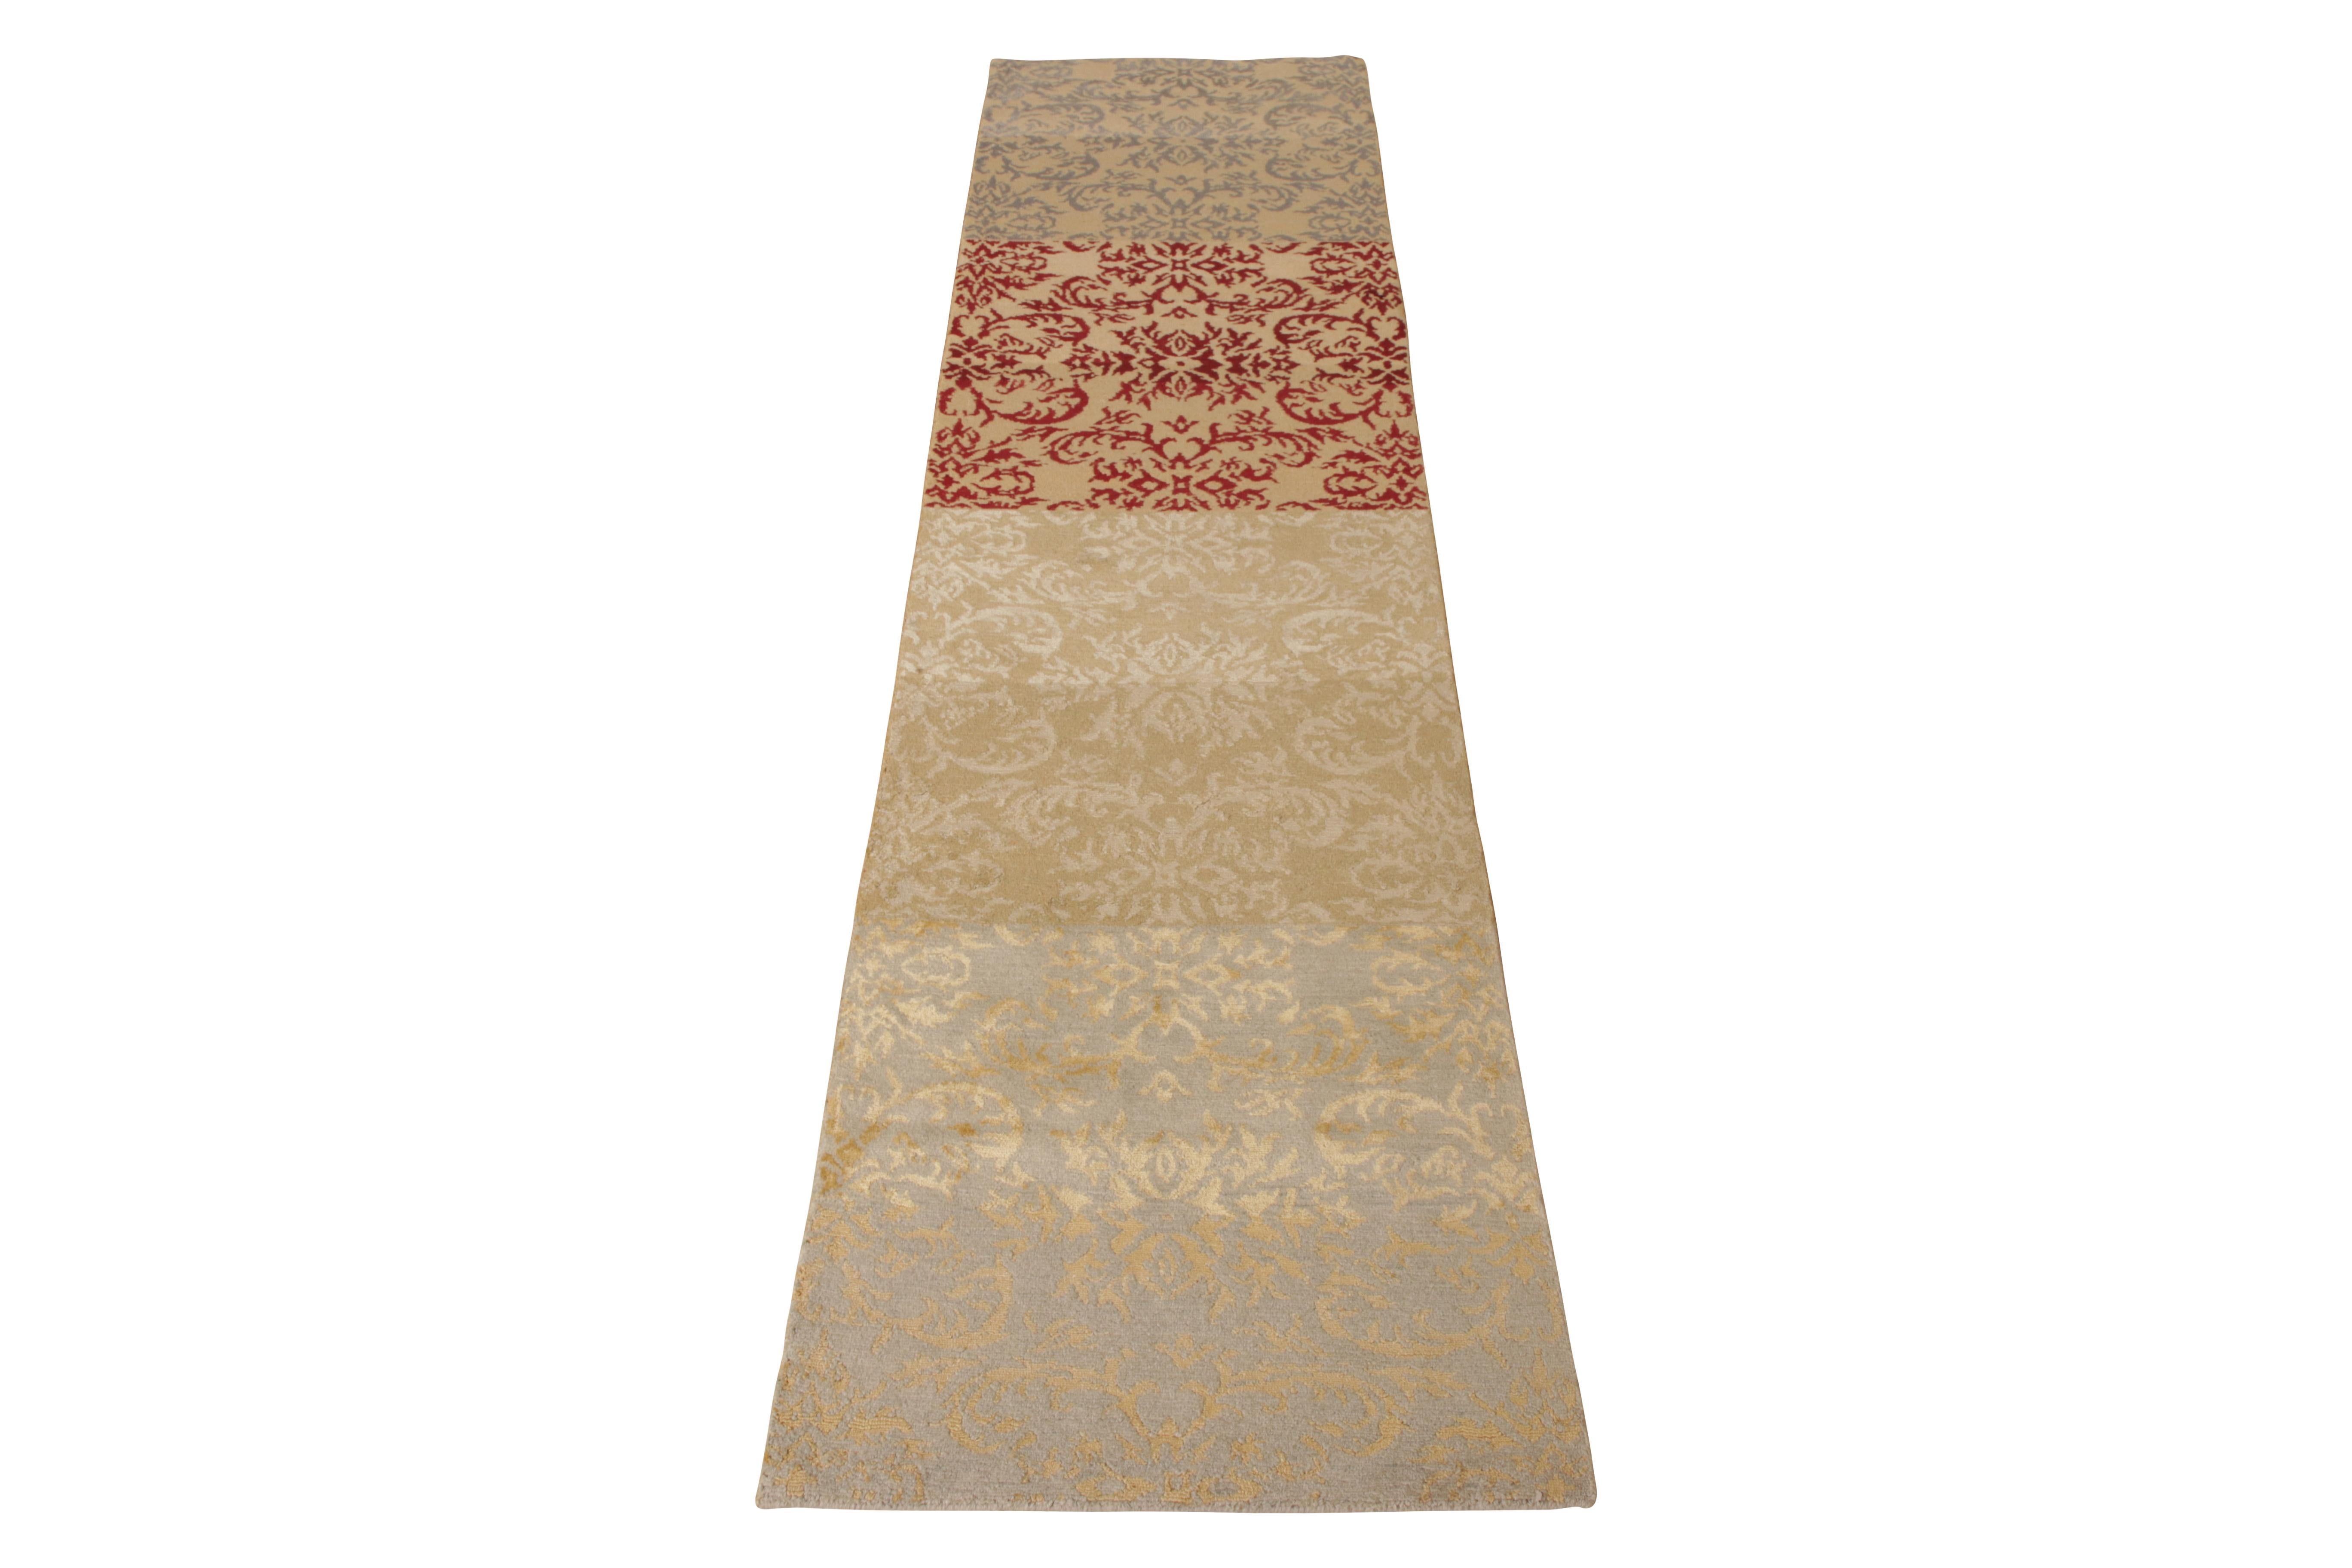 A 2 x 10 runner from the European Collection by Rug & Kilim, hand knotted in a blend of wool and lustrous silk. Enjoying regal beige-brown and gold in the prevailing hues, complemented by the silk’s sheen for a brilliant play of light. A